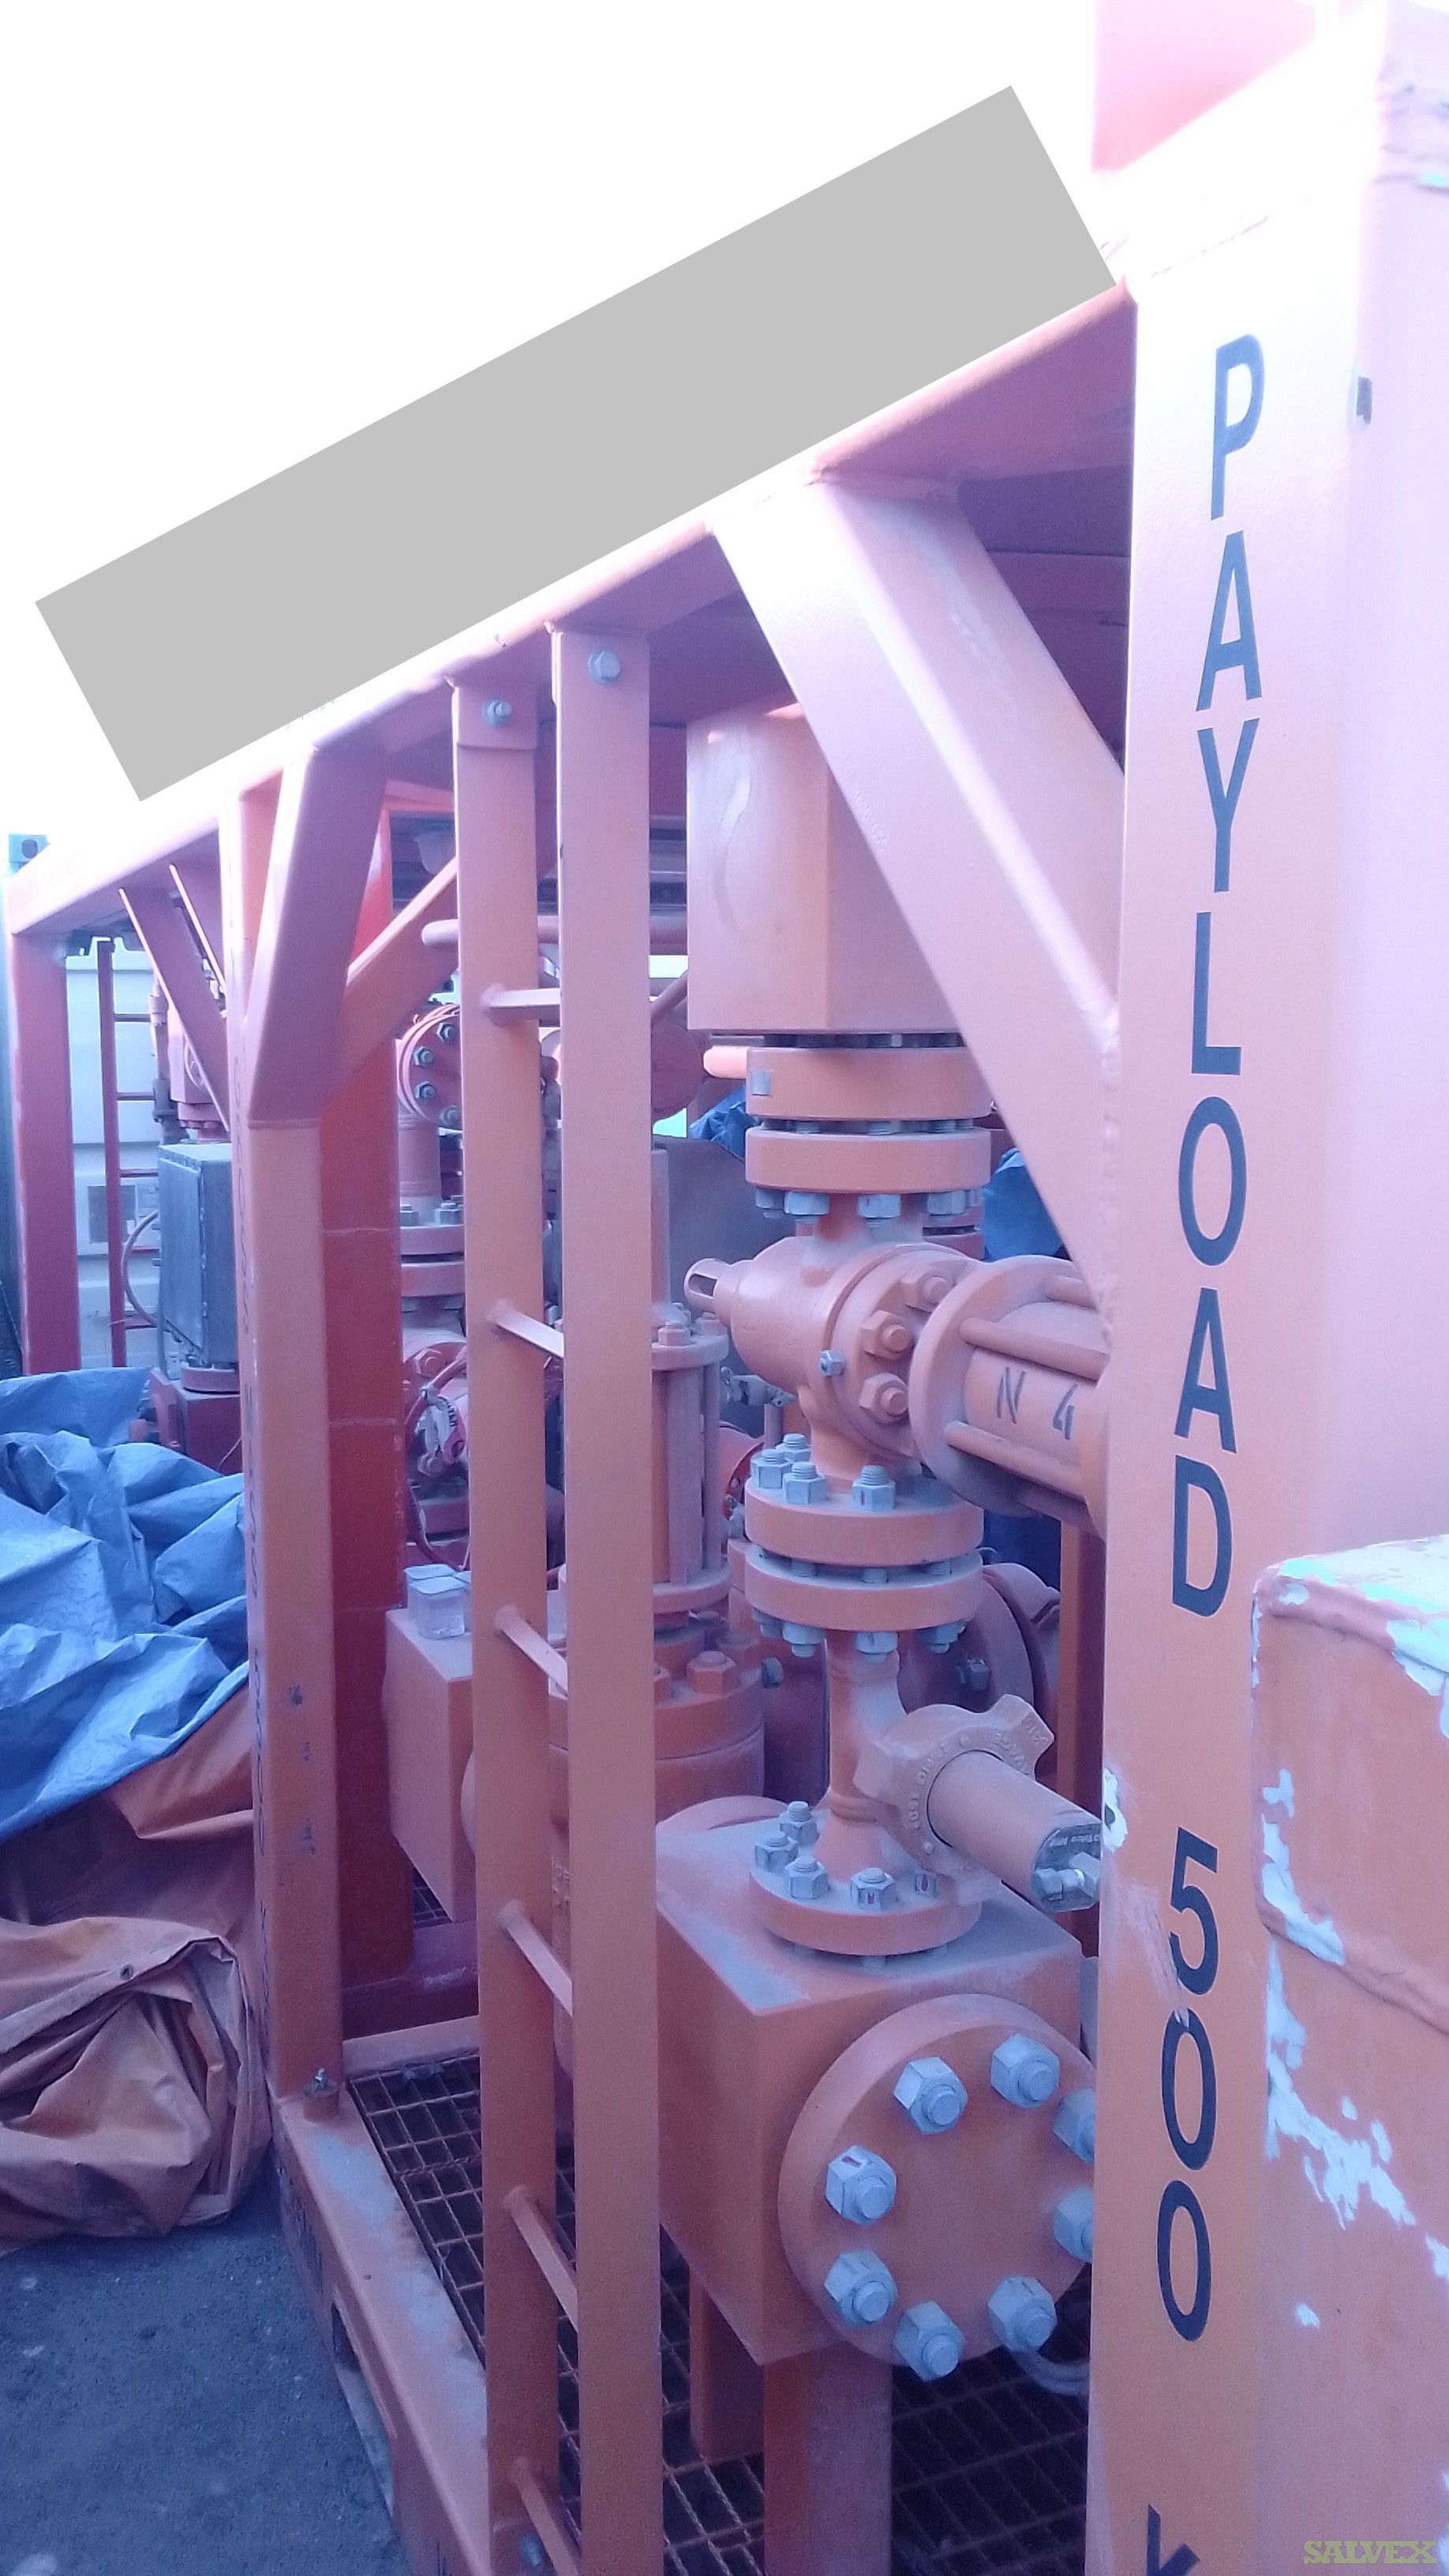 NSD (Non Stop Drilling) Equipment: Subs, Manifolds, Drill Mud Savers, Test Pumps/Panels, Sub Baskets, Pipe Racks, Single & Two Pieces V11 NSD Valves  (381 Units)